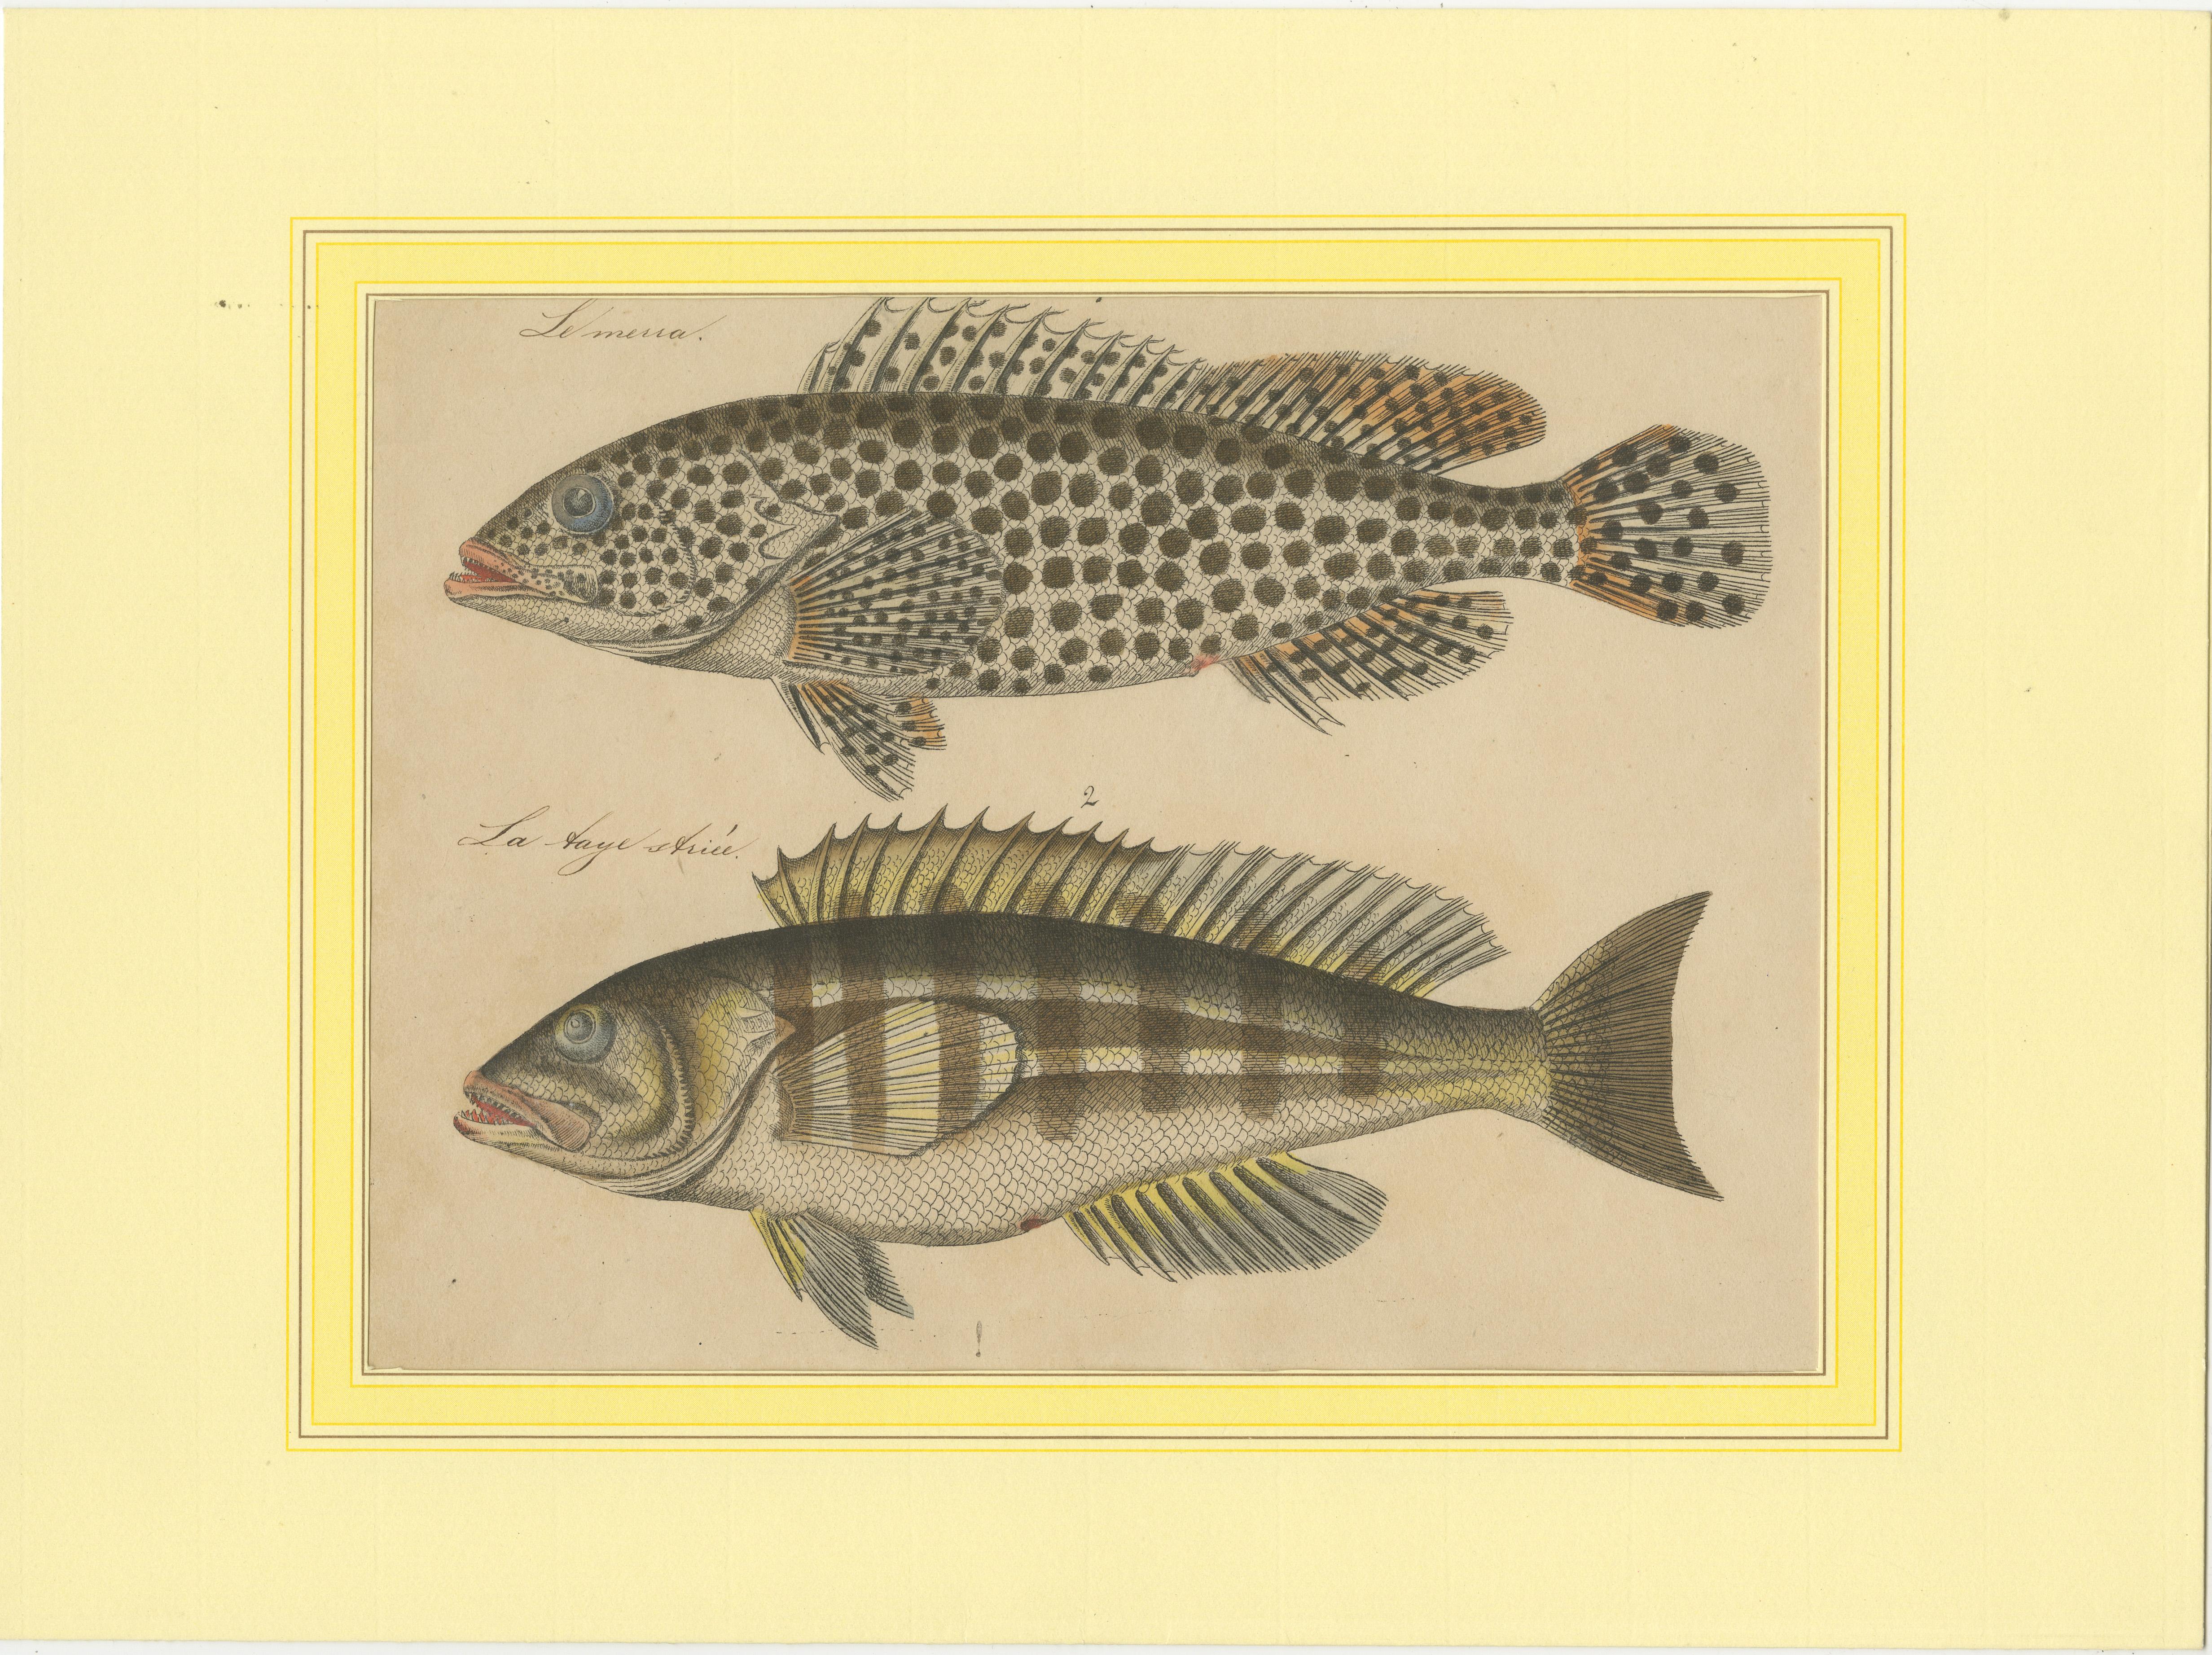 The fishes in the images are  part of a genus that includes groupers. They are likely from 